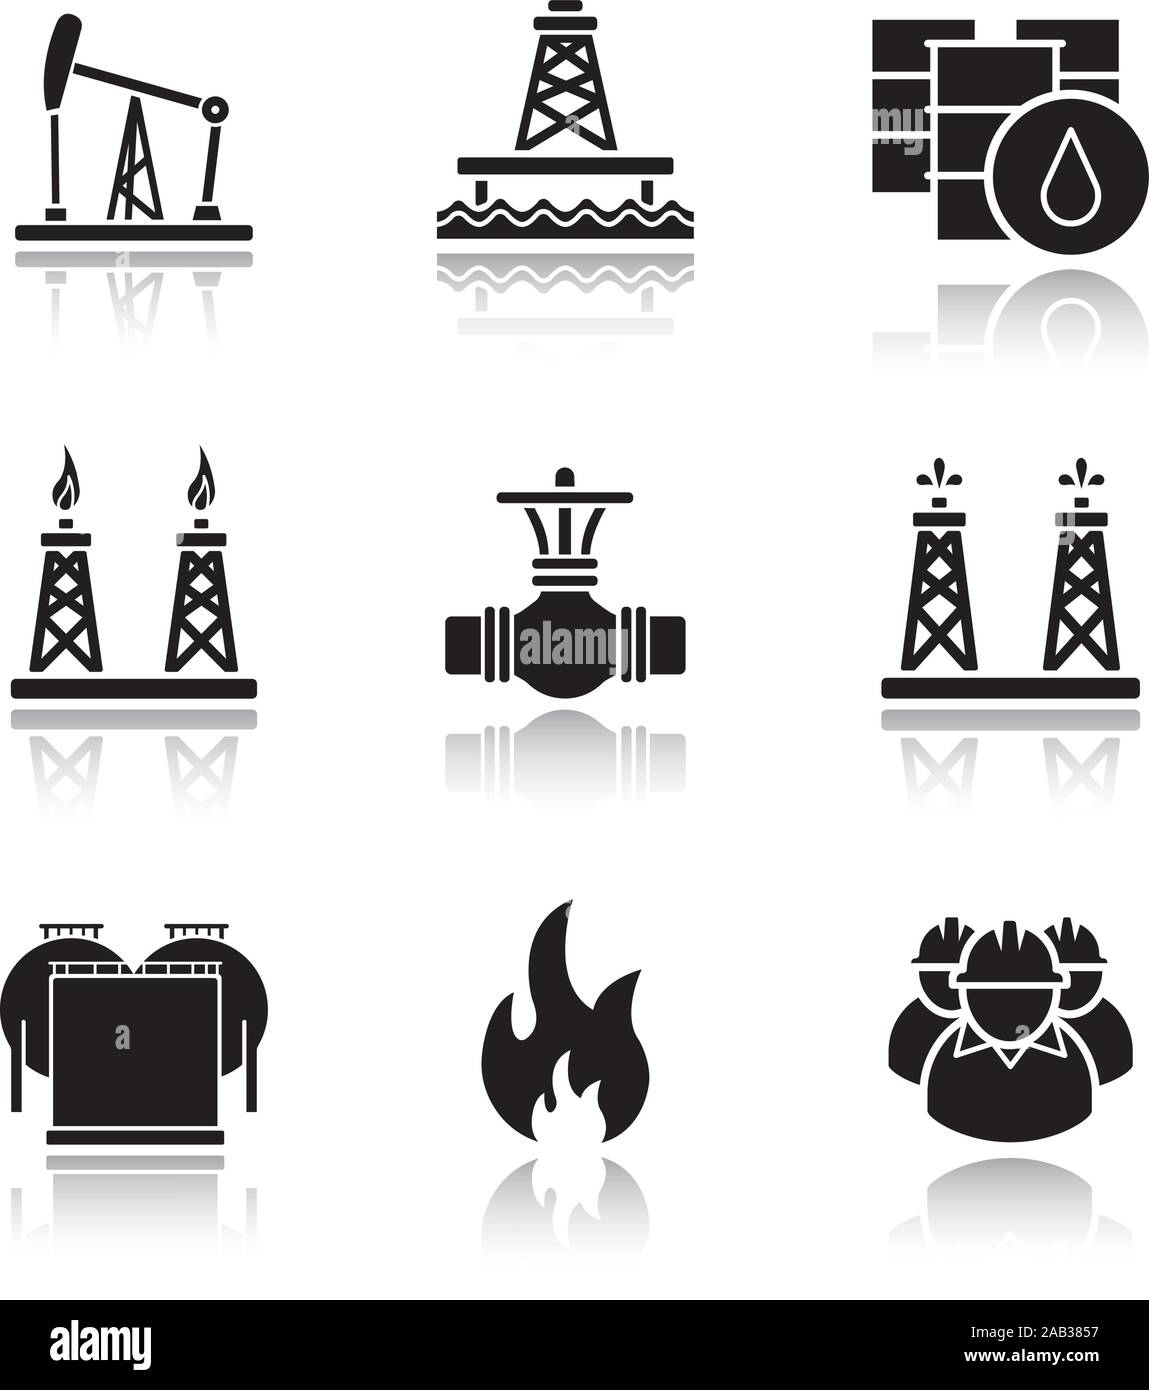 Oil industry drop shadow black icons set. Oil pump jack, barrels, gas pipe valve, gas and fuel production platforms, oil reservoir, flammable sign, in Stock Vector